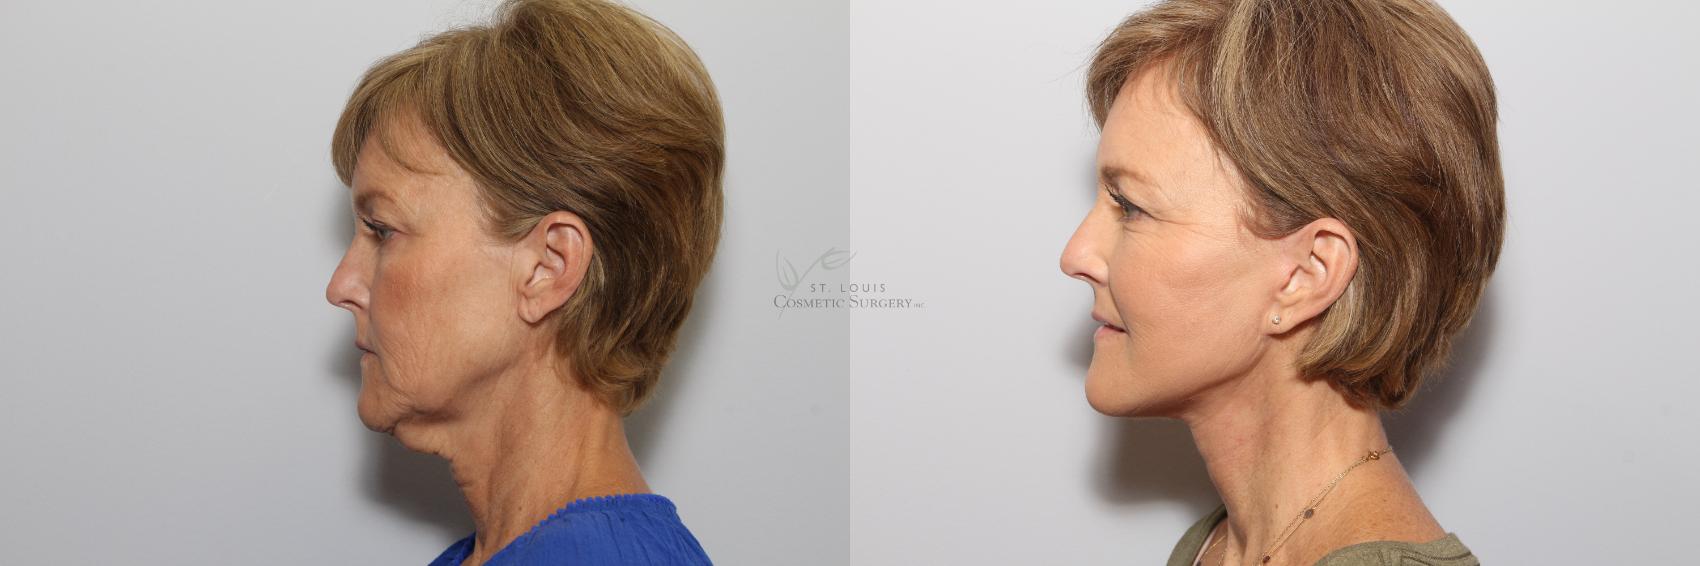 Neck Lift Before & After Photo | St. Louis, MO | St. Louis Cosmetic Surgery